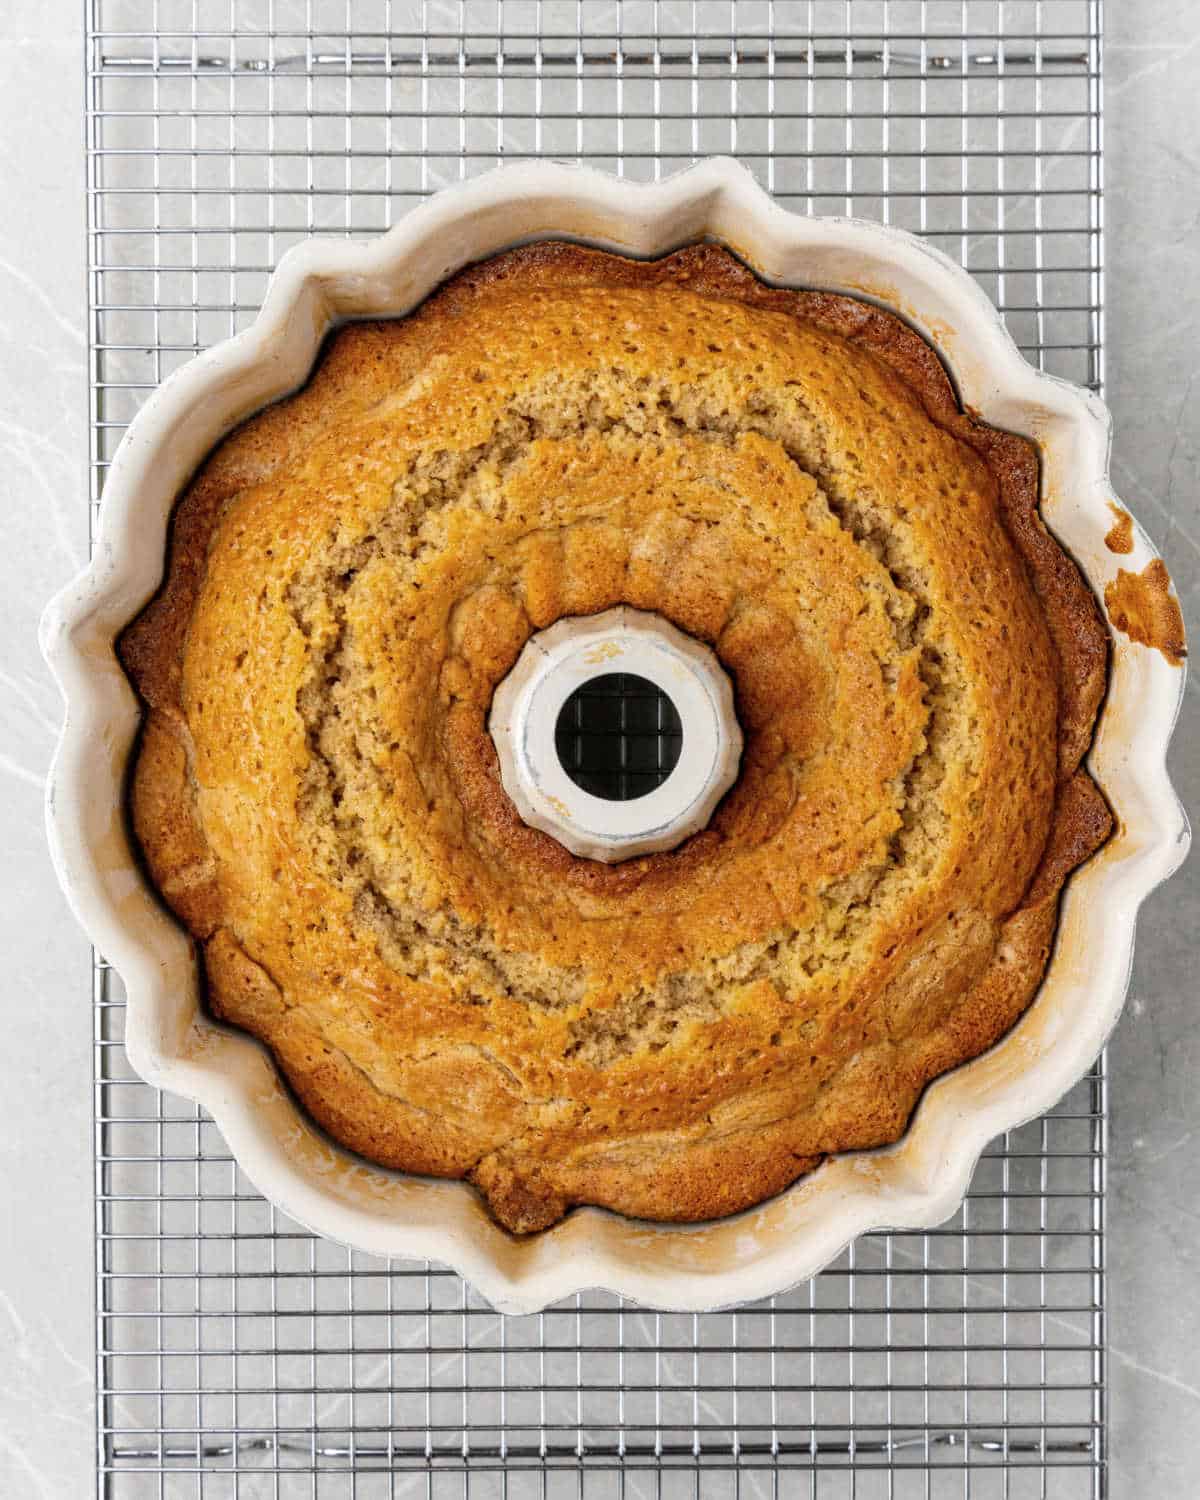 Baked walnut bundt cake in the white pan on a wire rack on a grey surface.